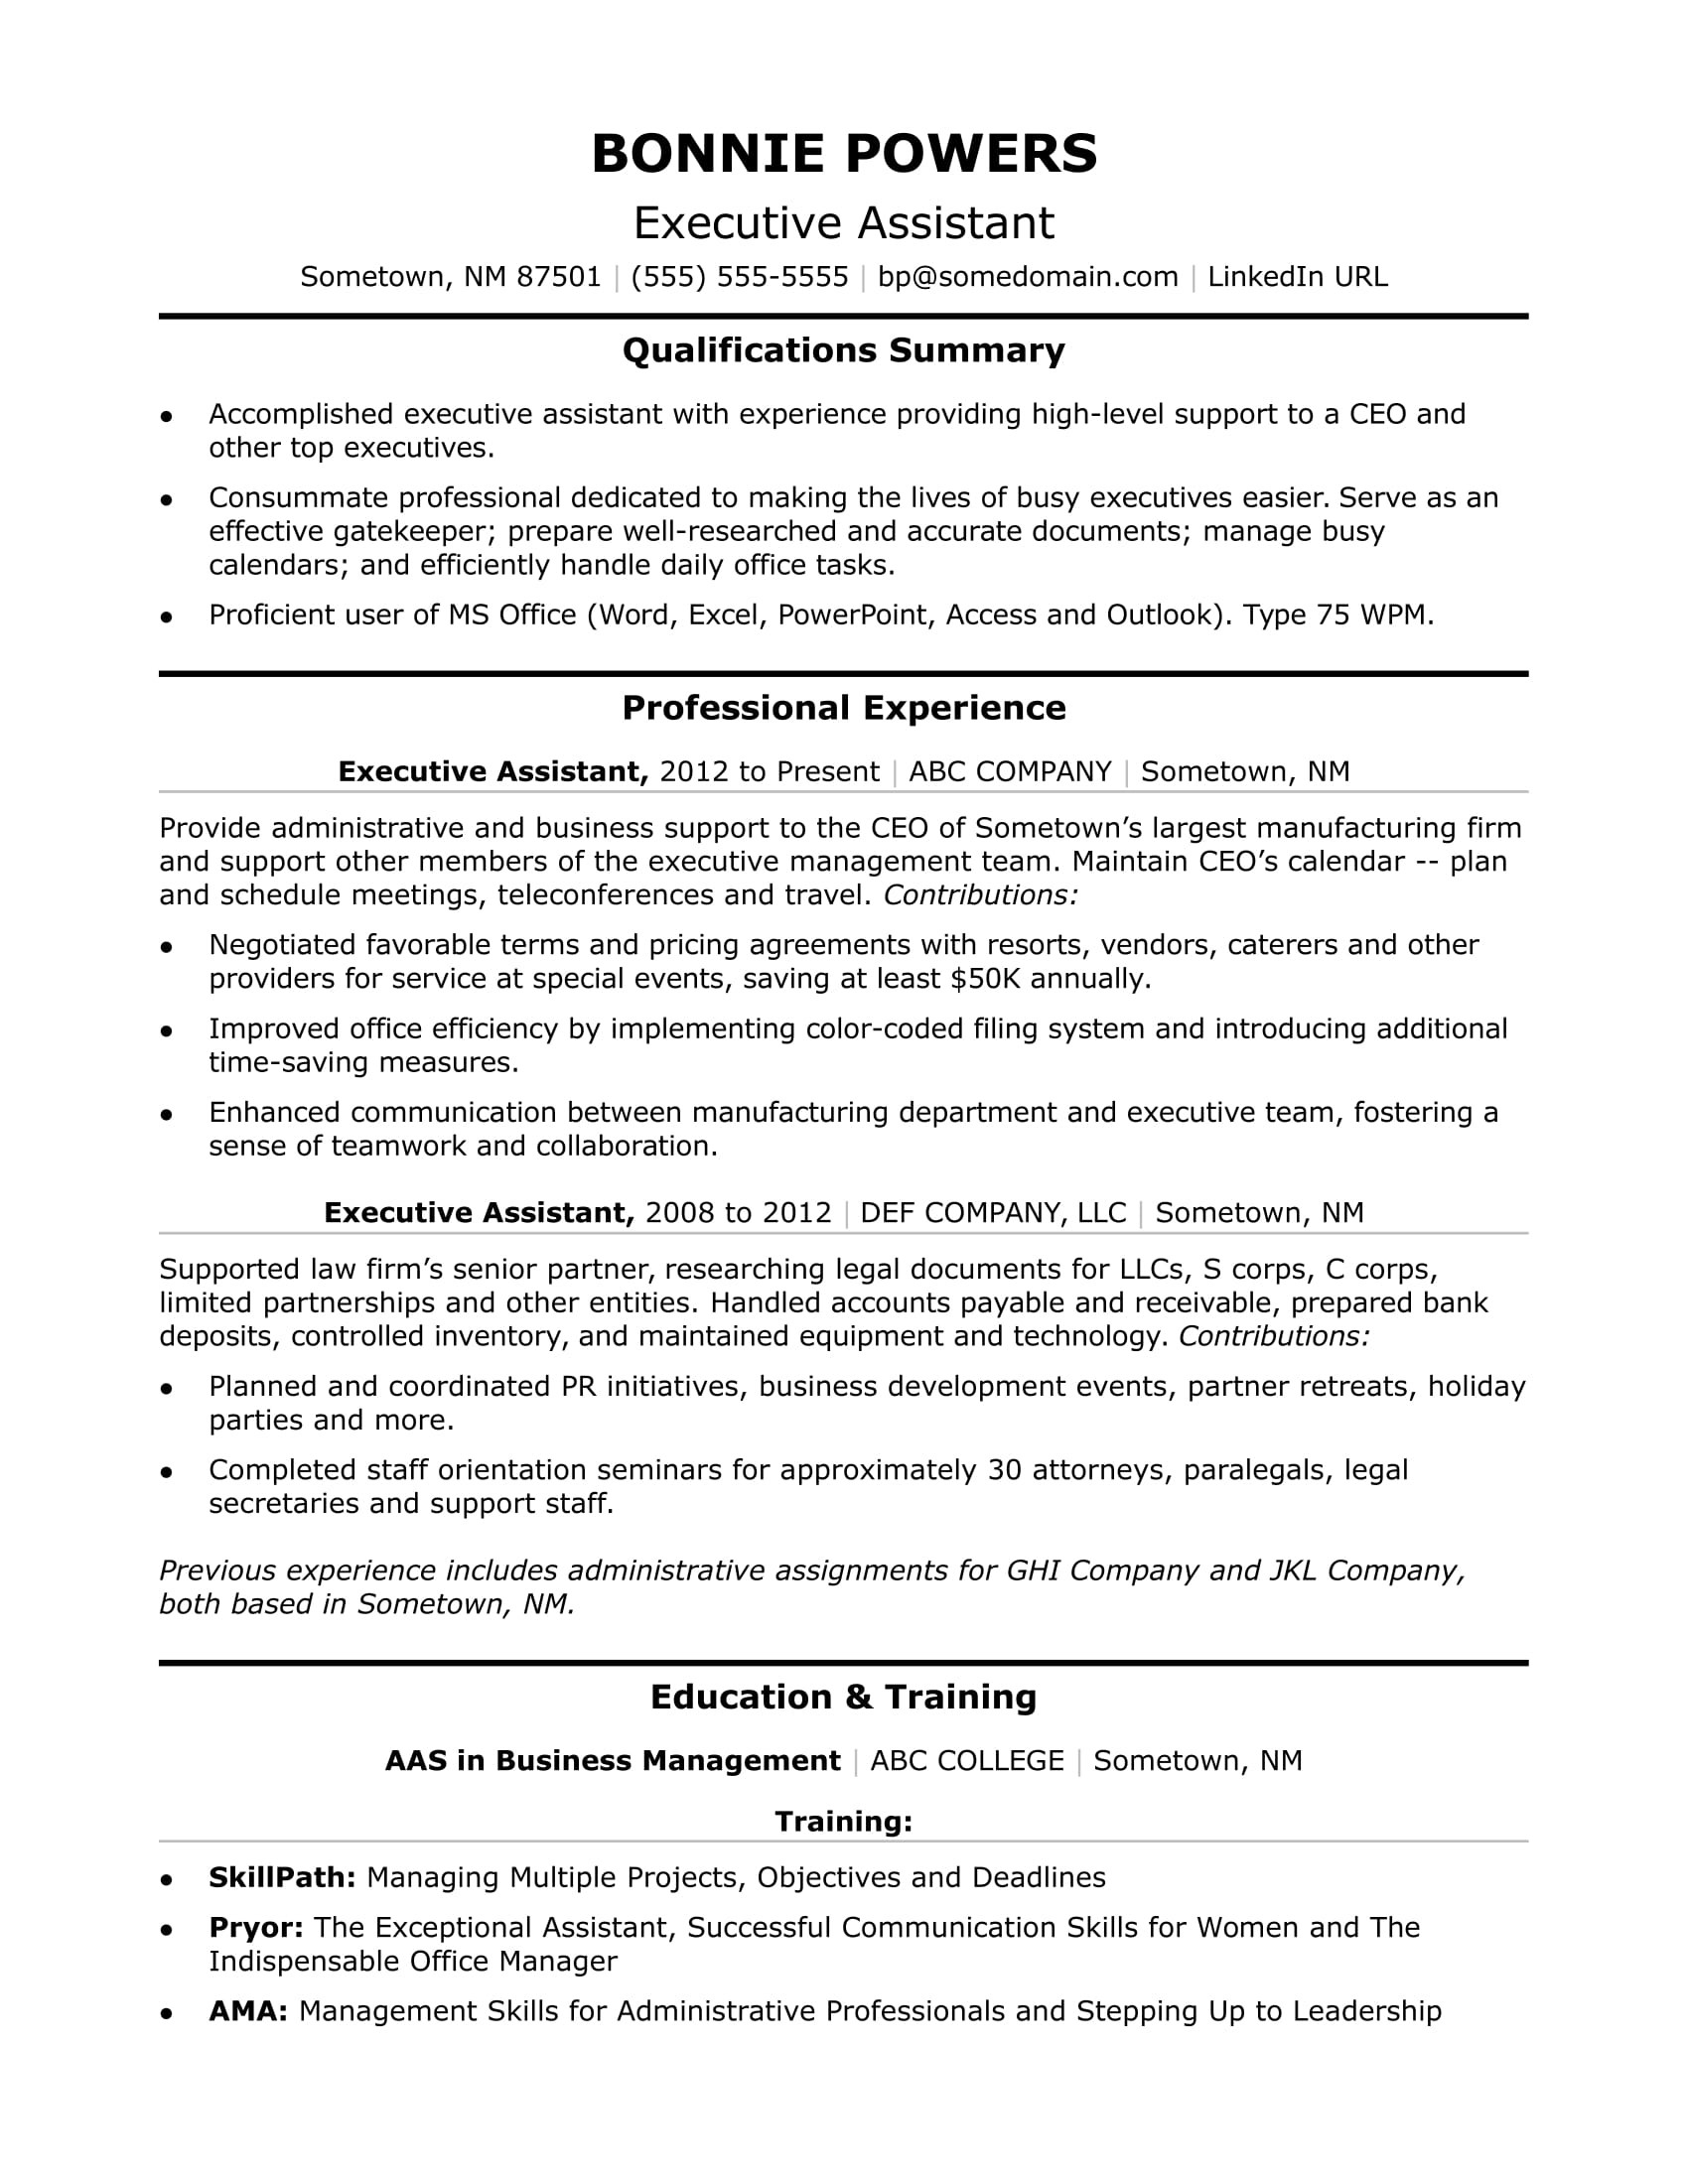 Sample Resume Showing You Have Prior Telephone Skills Executive assistant Resume Monster.com